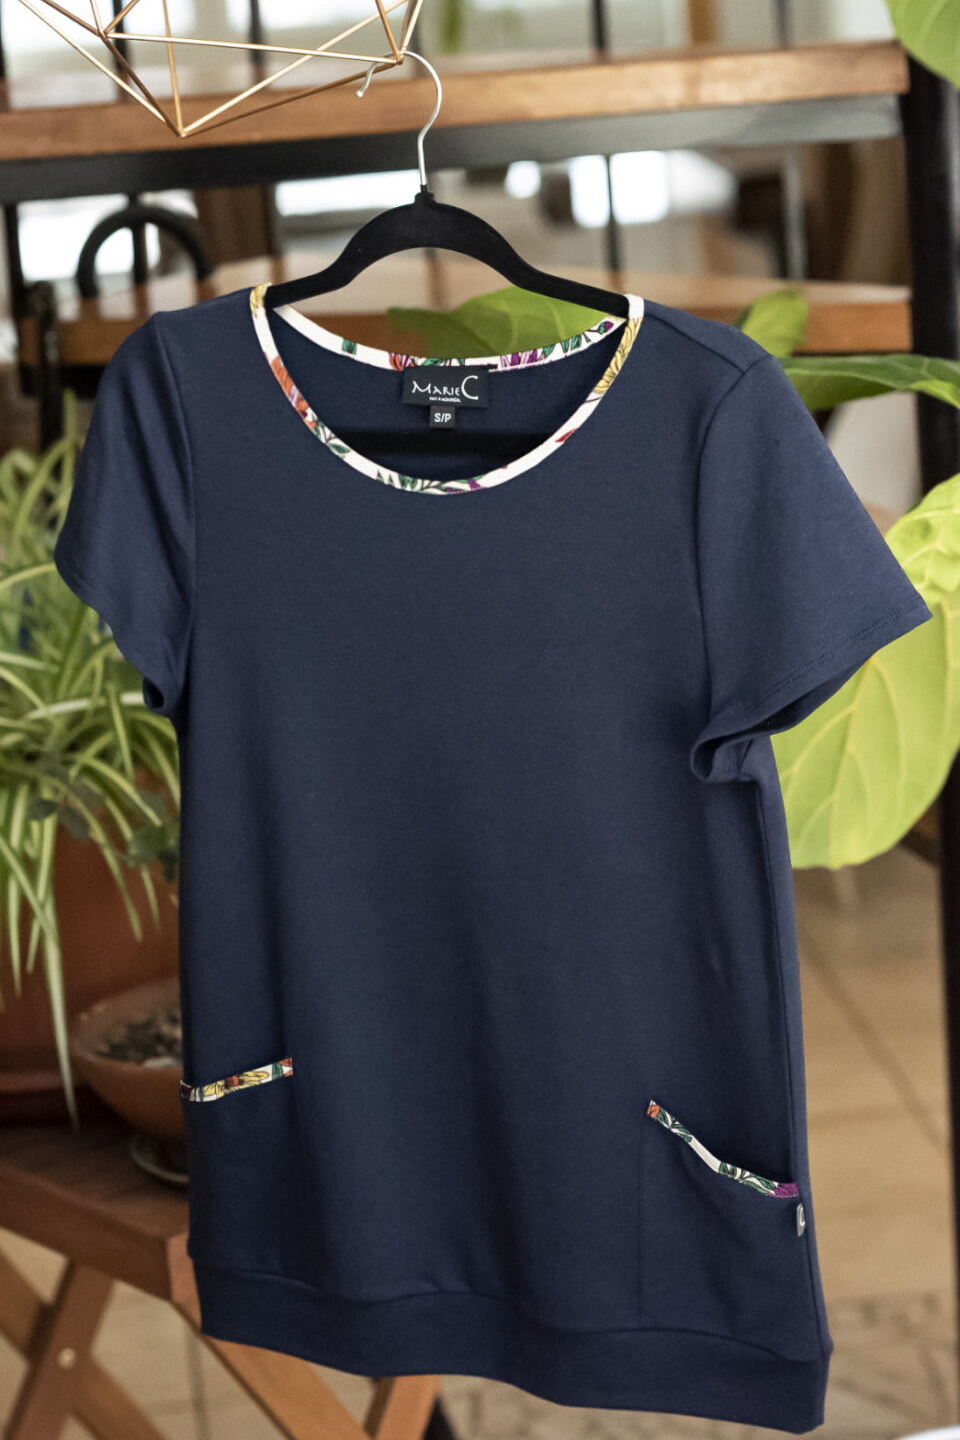 Vuela Top by Marie C, Navy, contrast trim at neckline and on patch pockets, band at hem, eco-friendly, OEKO-TEX certified, bamboo rayon and cotton, sizes XS to XL, made in Montreal 